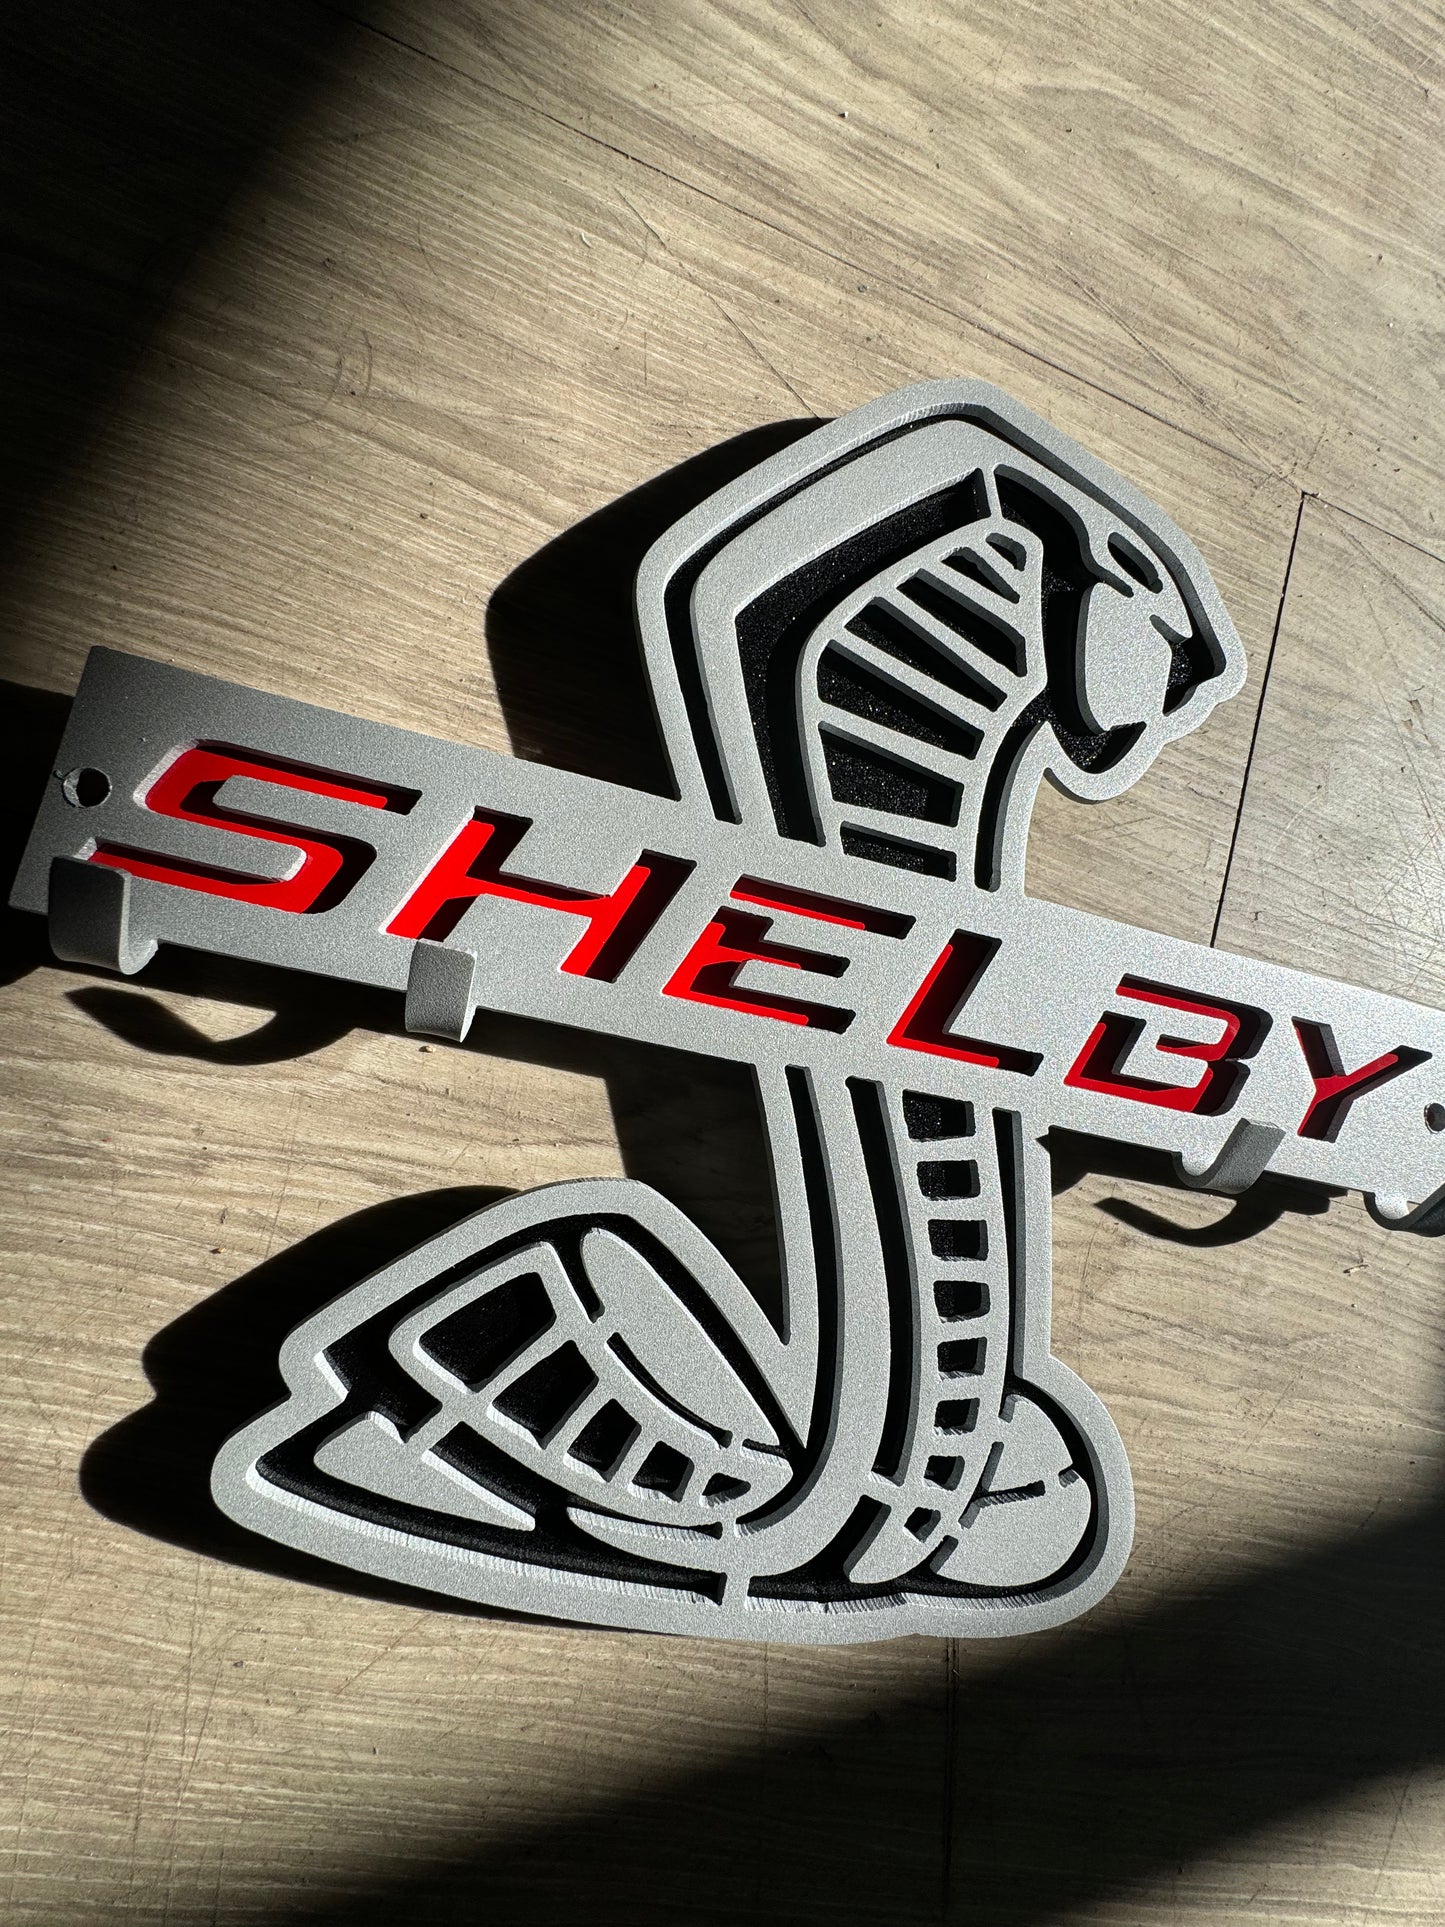 Shelby key hanger rack silver red and black